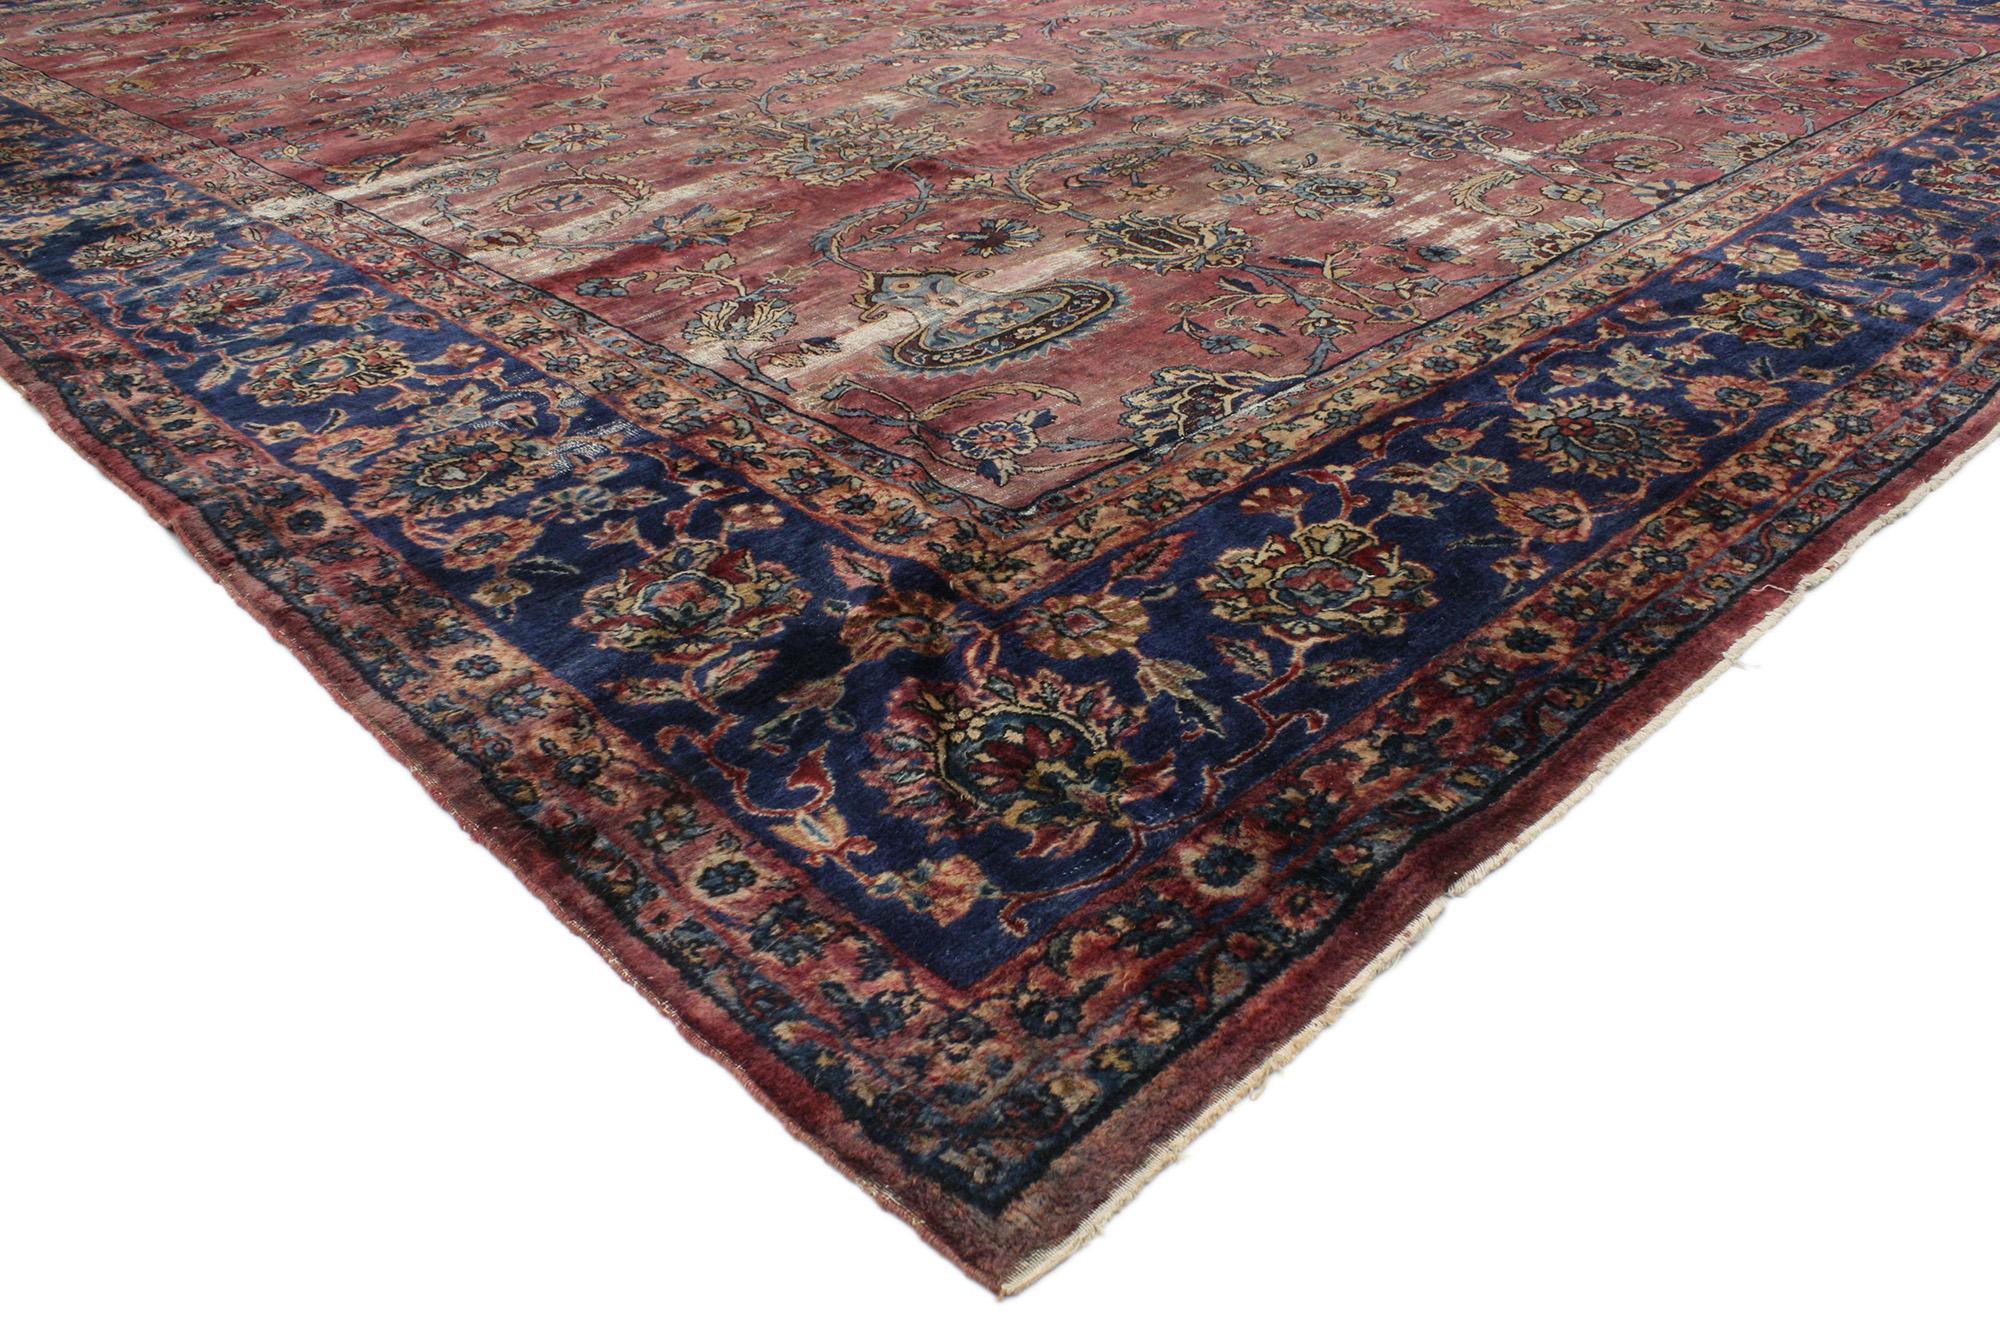 76681 distressed antique Persian Kerman rug with New England Cape Cod style 09'10 x 13'05. With a timeless design and defining colors, evoke the charming New England Cape Cod style with this hand knotted wool distressed antique Persian Kerman rug.